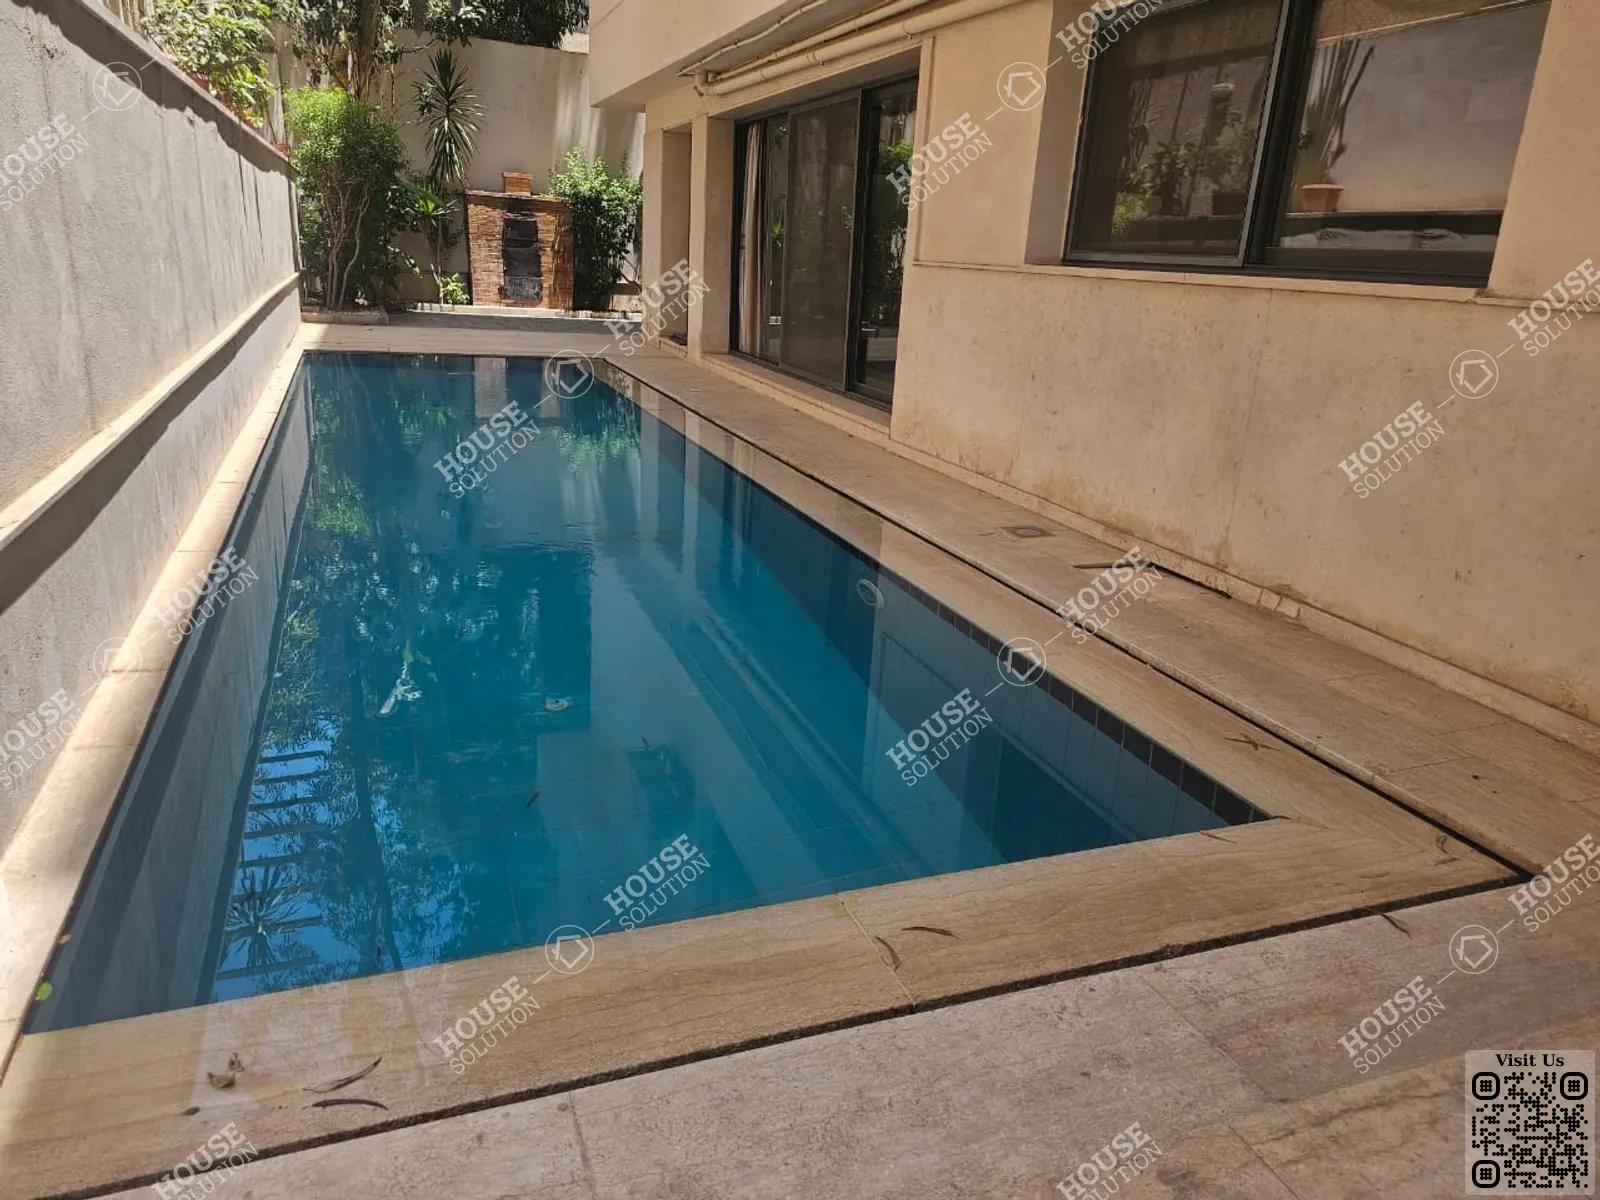 PRIVATE SWIMMING POOL  @ Ground Floors For Rent In Maadi Maadi Degla Area: 450 m² consists of 4 Bedrooms 4 Bathrooms Modern furnished 5 stars #5906-2